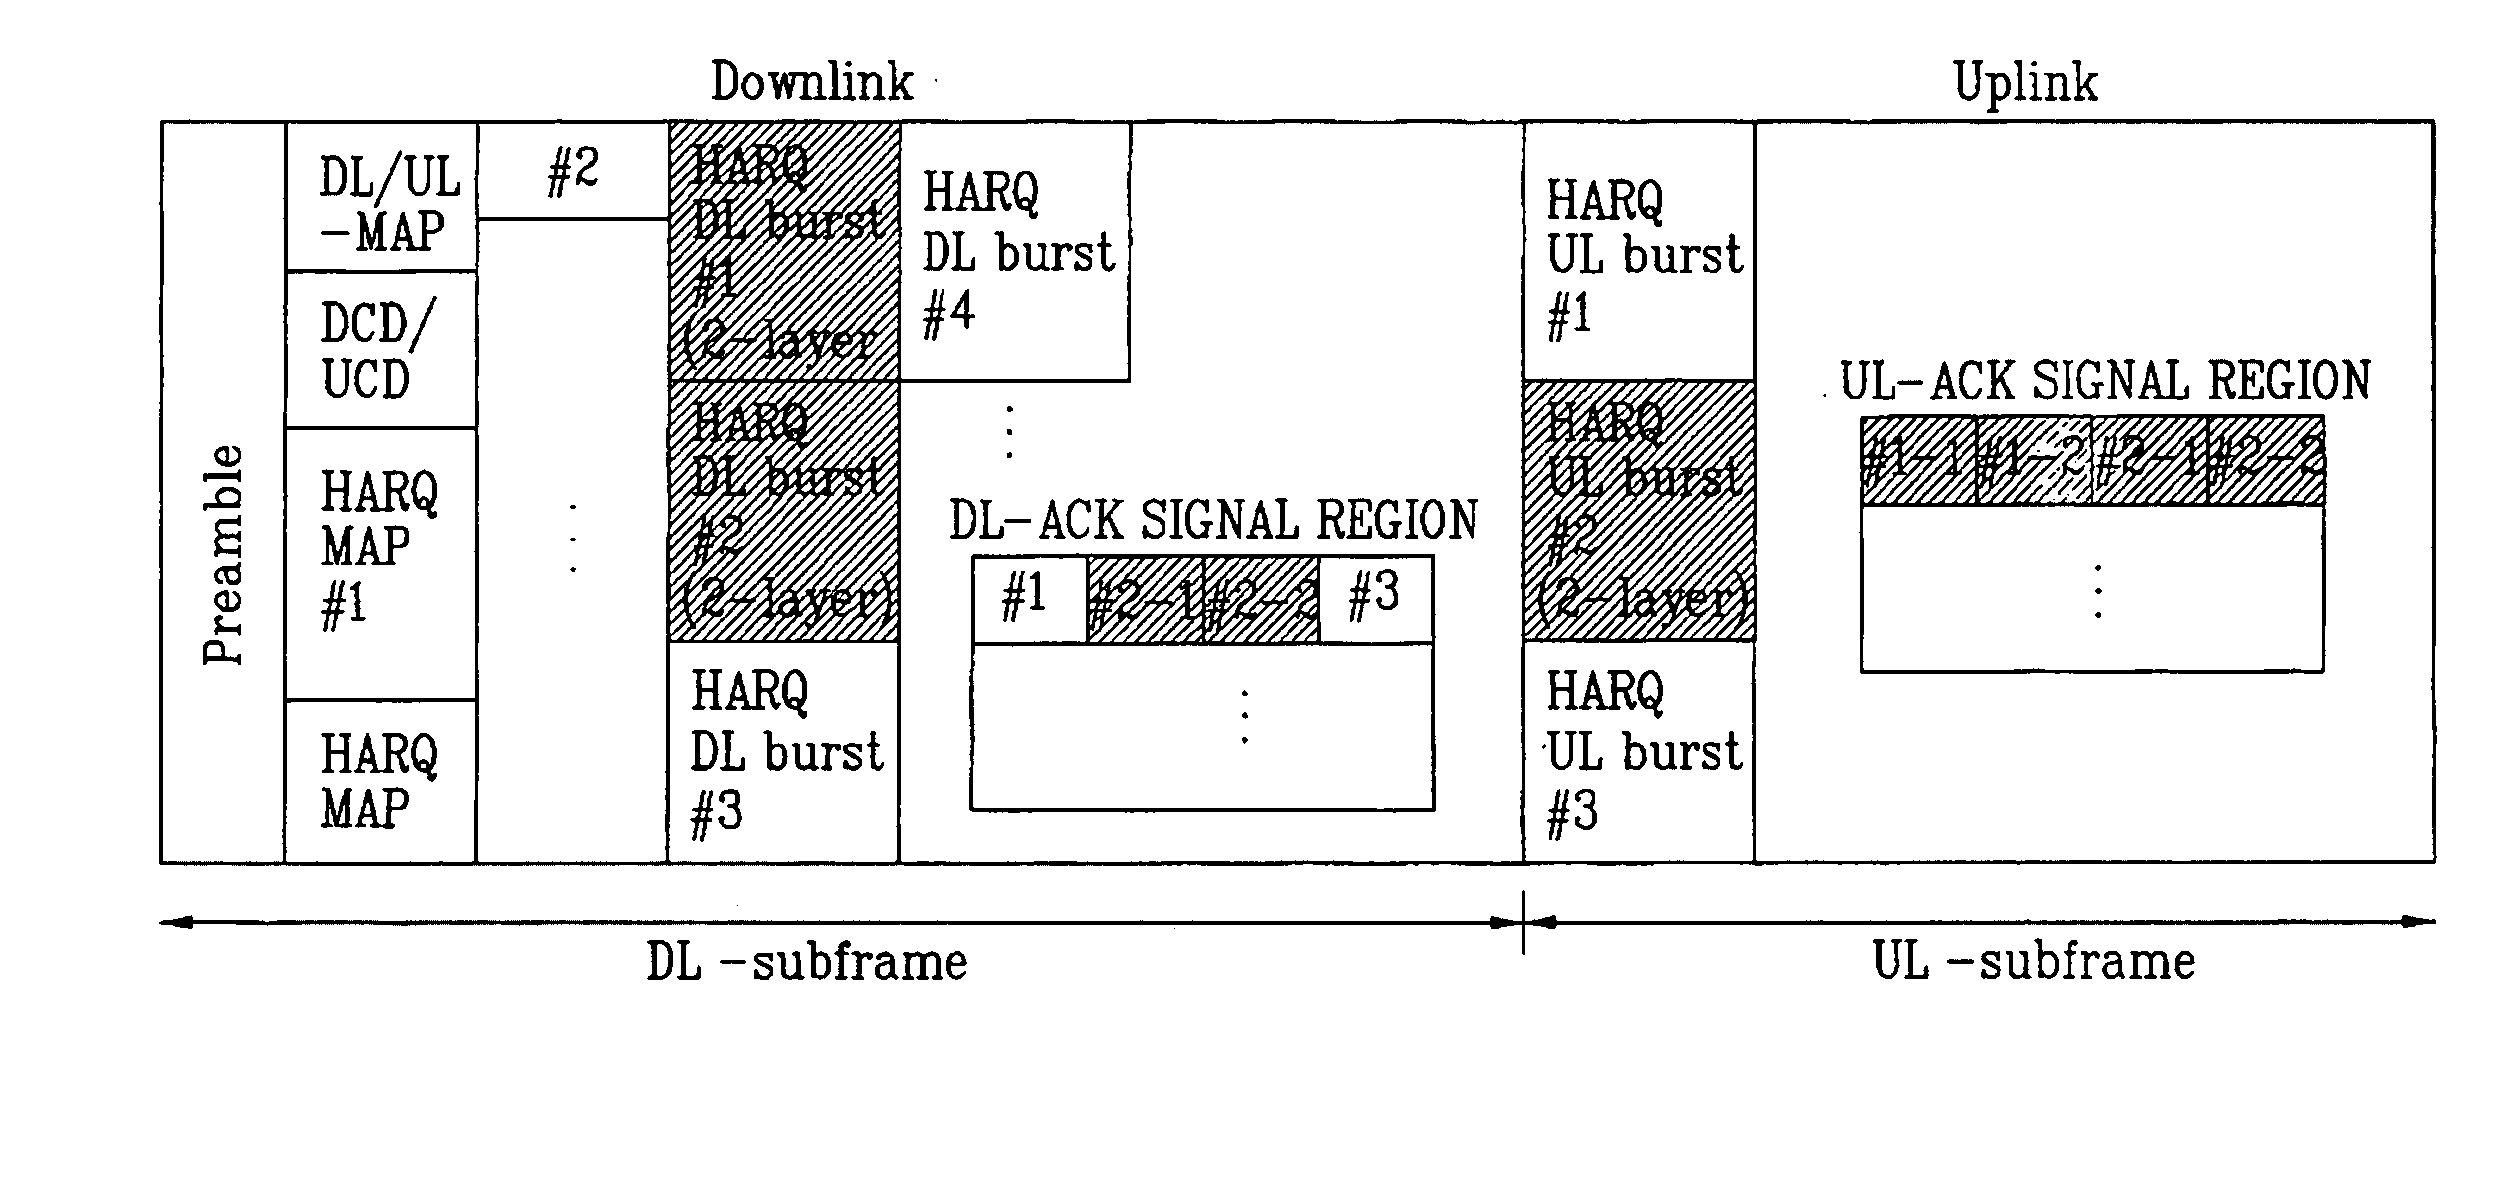 Supporting hybrid automatic retransmission request in orthogonal frequency division multiplexing access radio access system